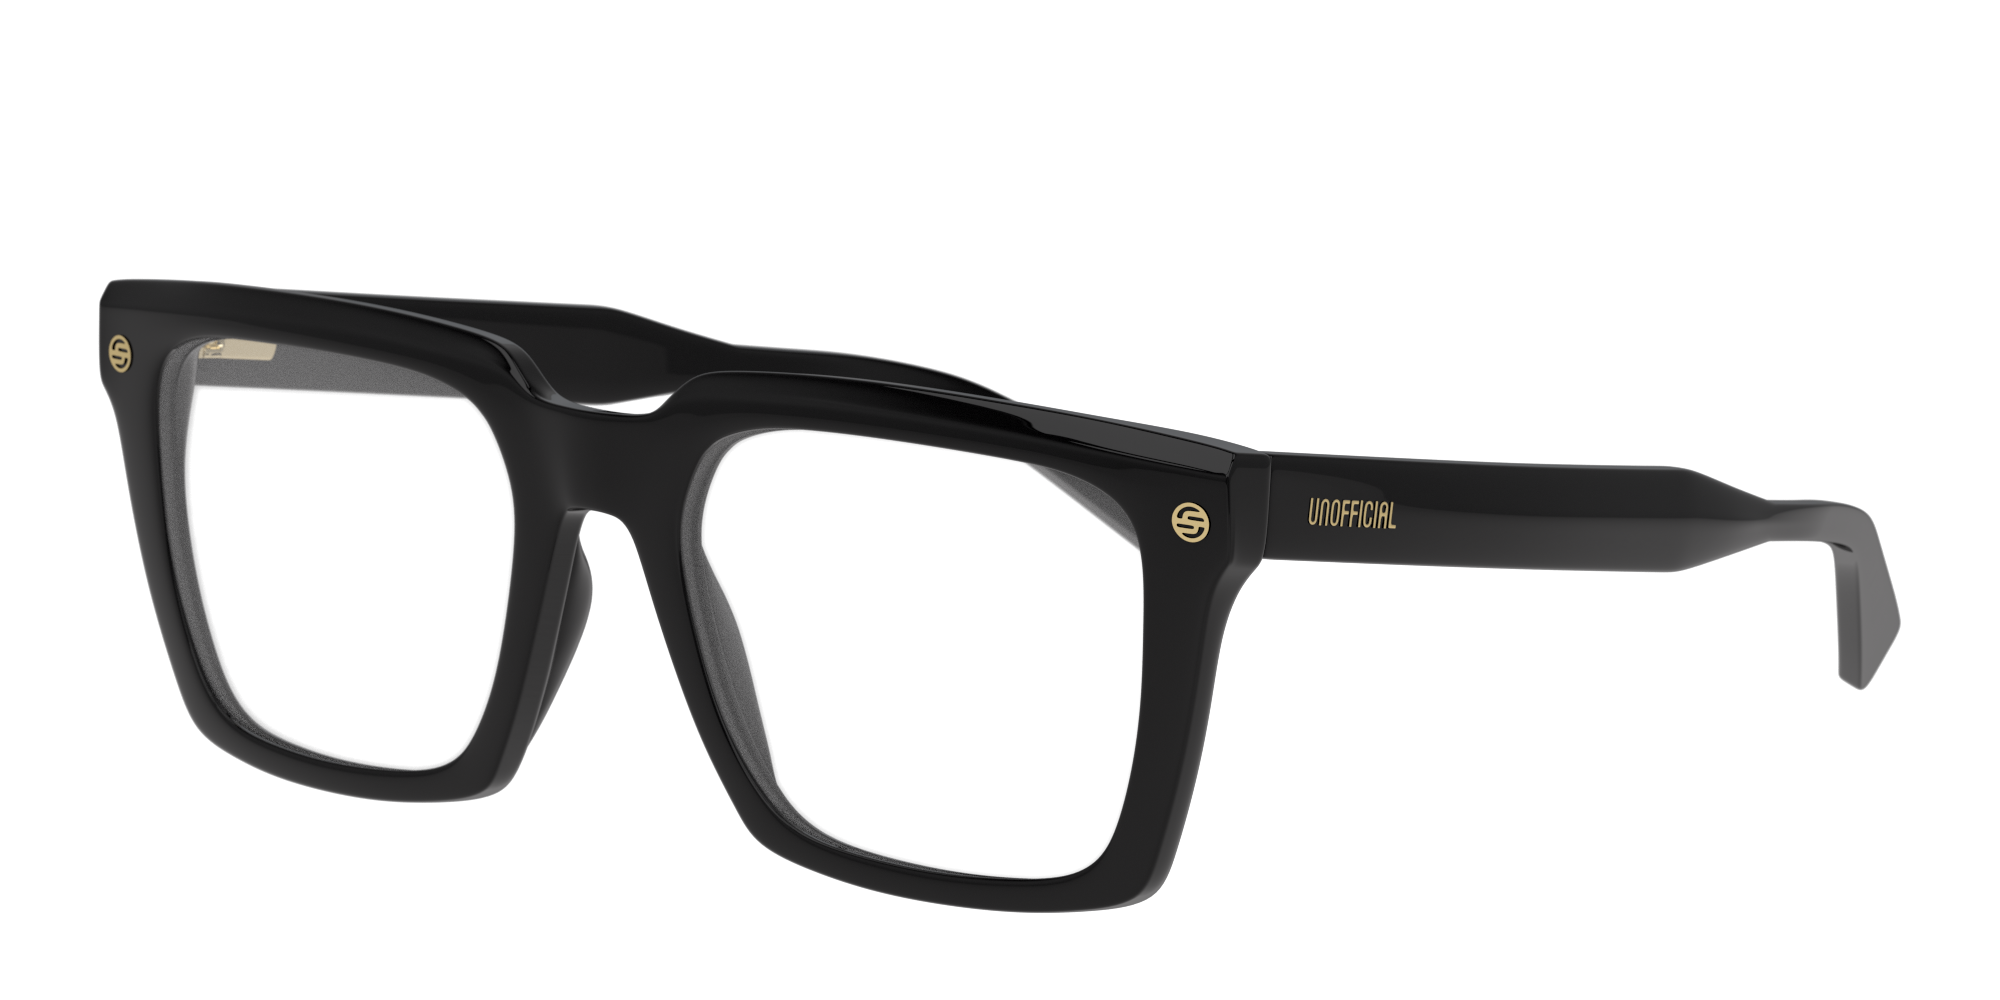 Angle_Left01 Unofficial UO2159 (001) Glasses Transparent / Black